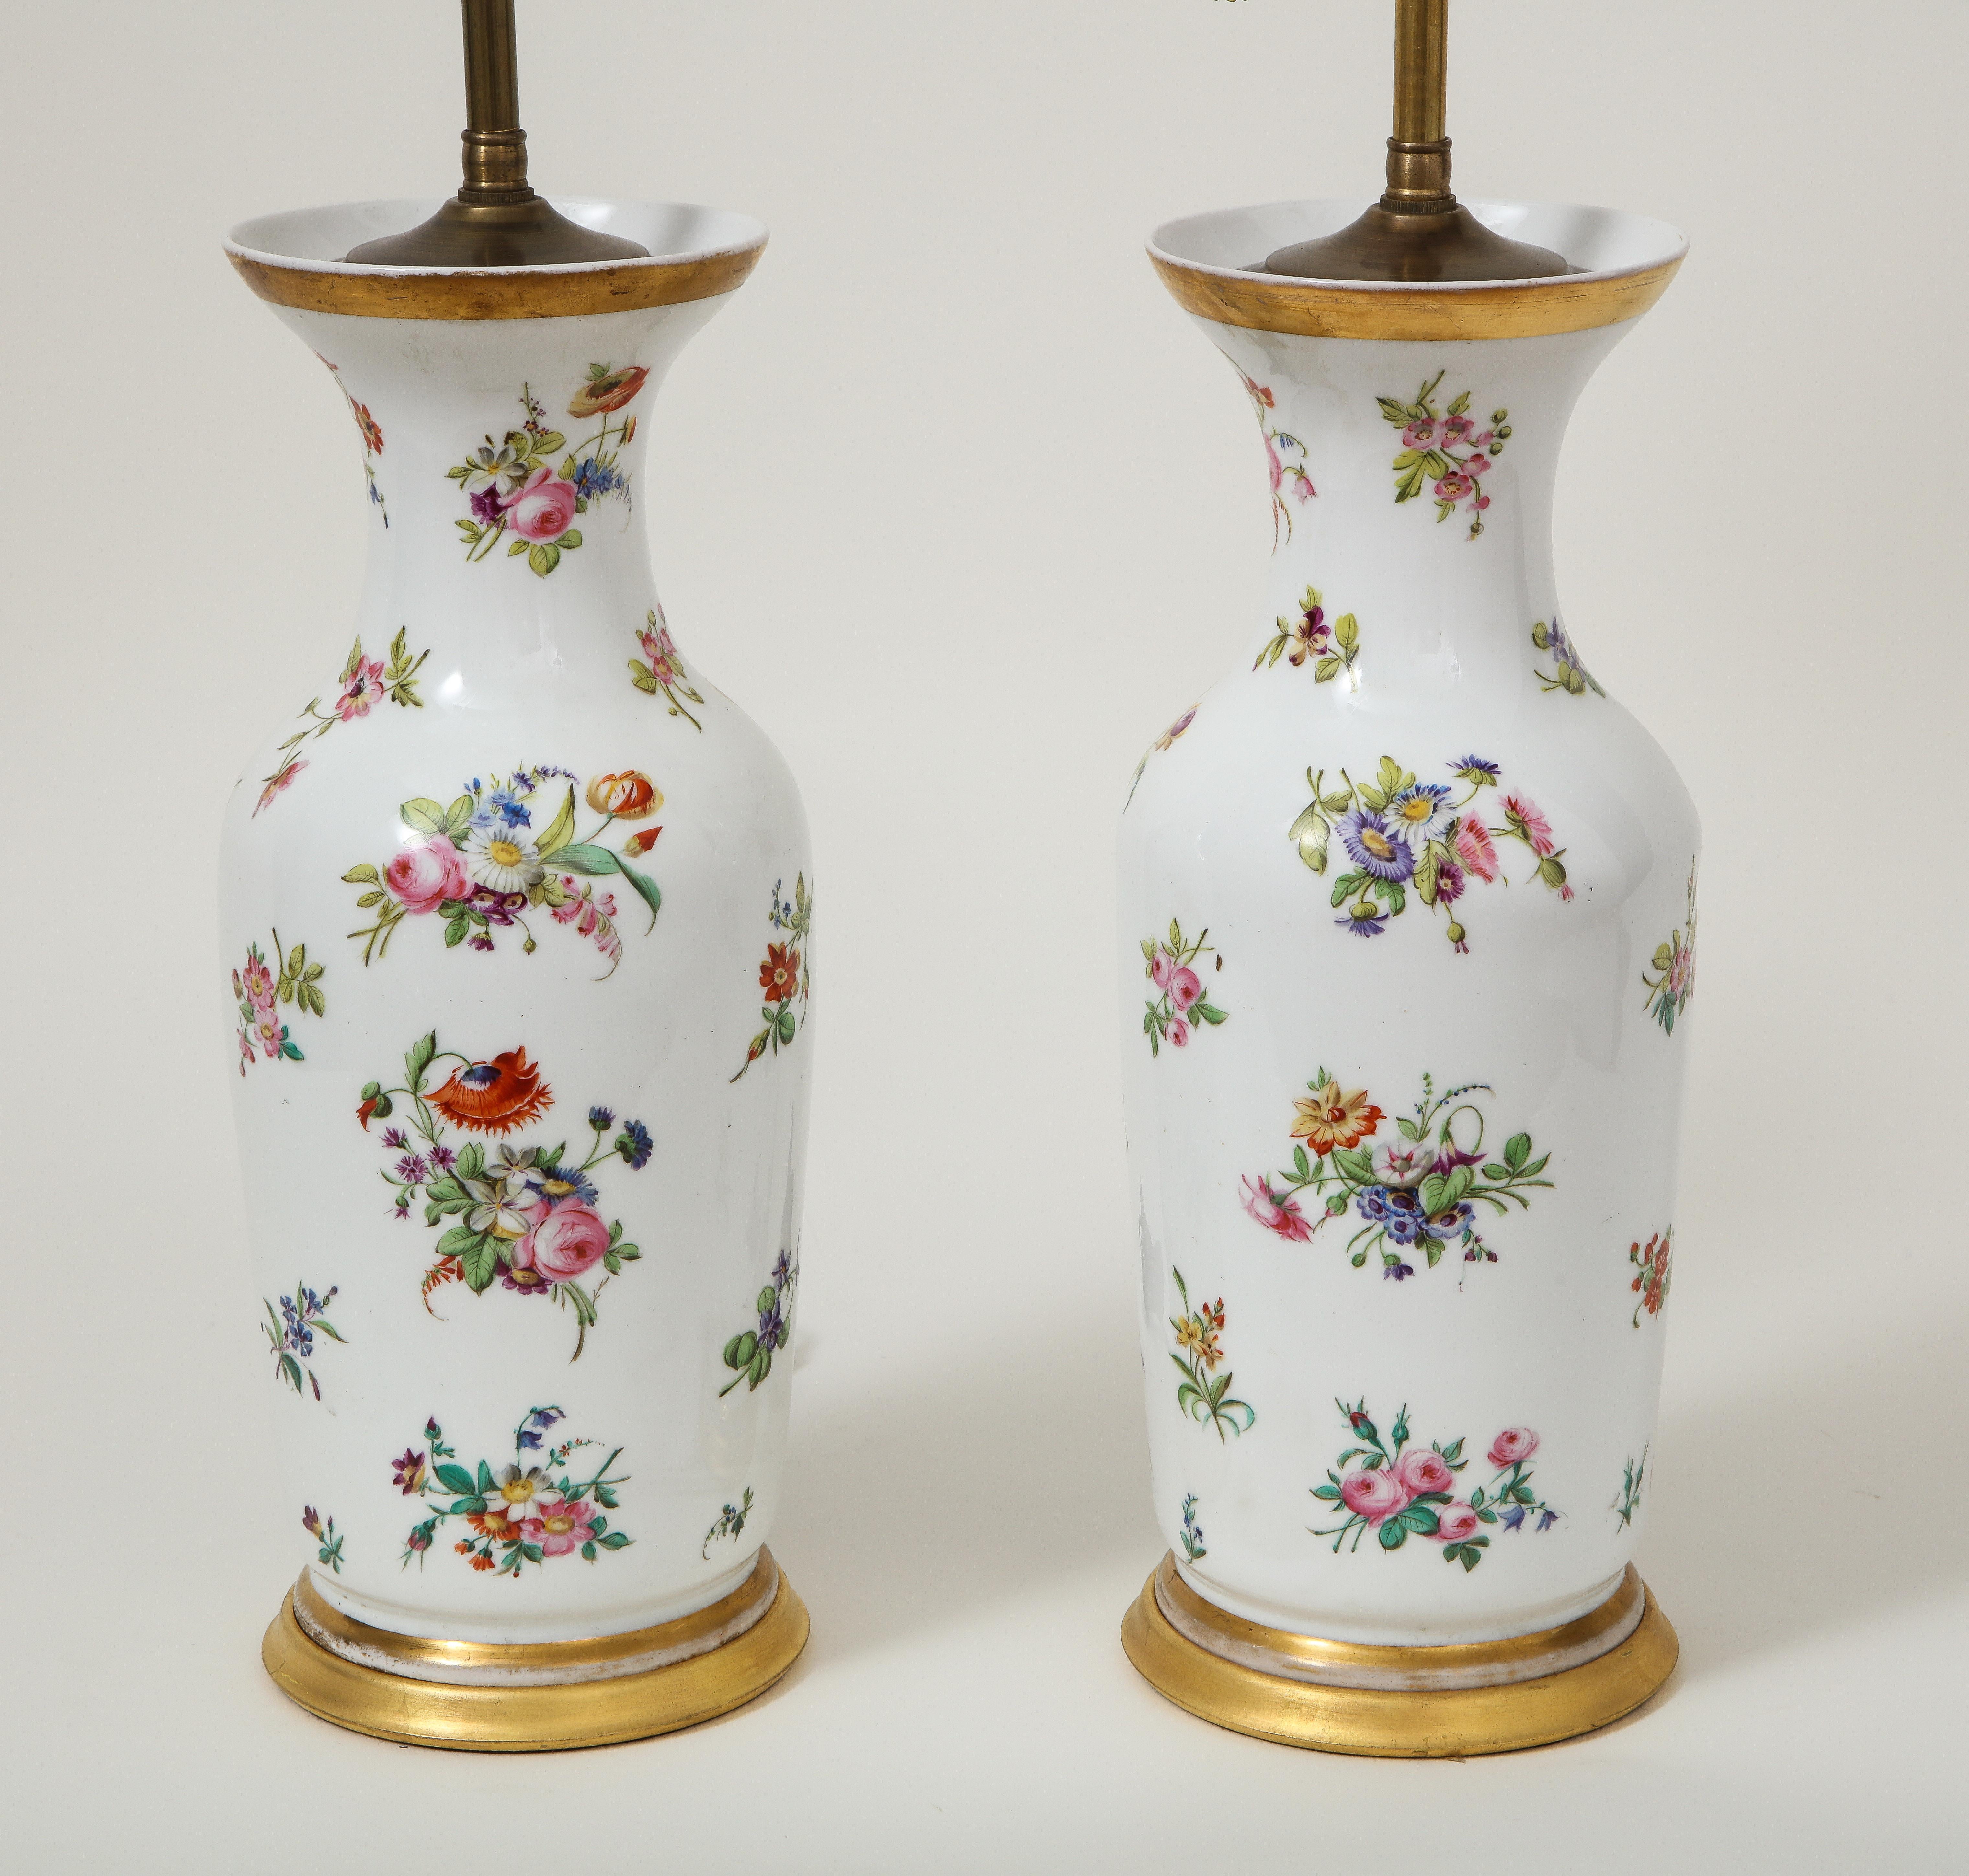 Each of baluster form decorated all-over with bunches of flowers, including auriculae, ranunculus, and forget-me-knots on the white porcelain ground; mounted on a turned giltwood base and fitted with adjustable brass rod and two bulb sockets.